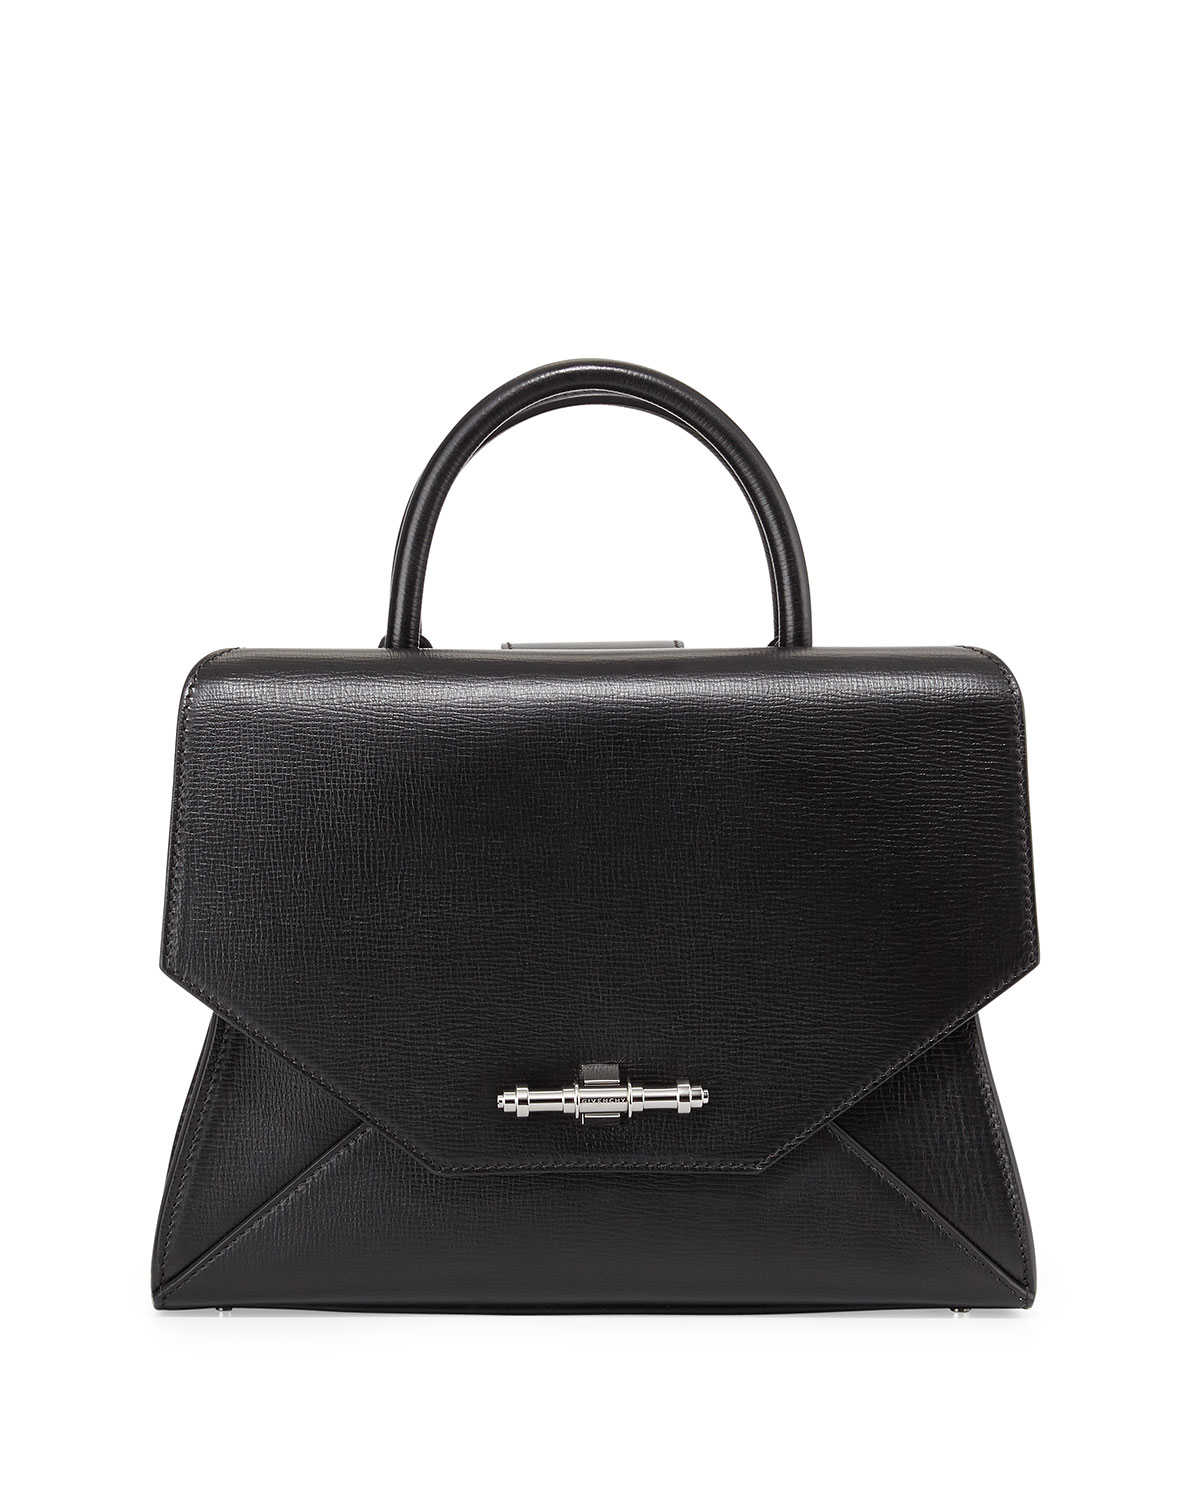 Givenchy Obsedia Top Handle Small Leather Satchel Bag in Black | Lyst